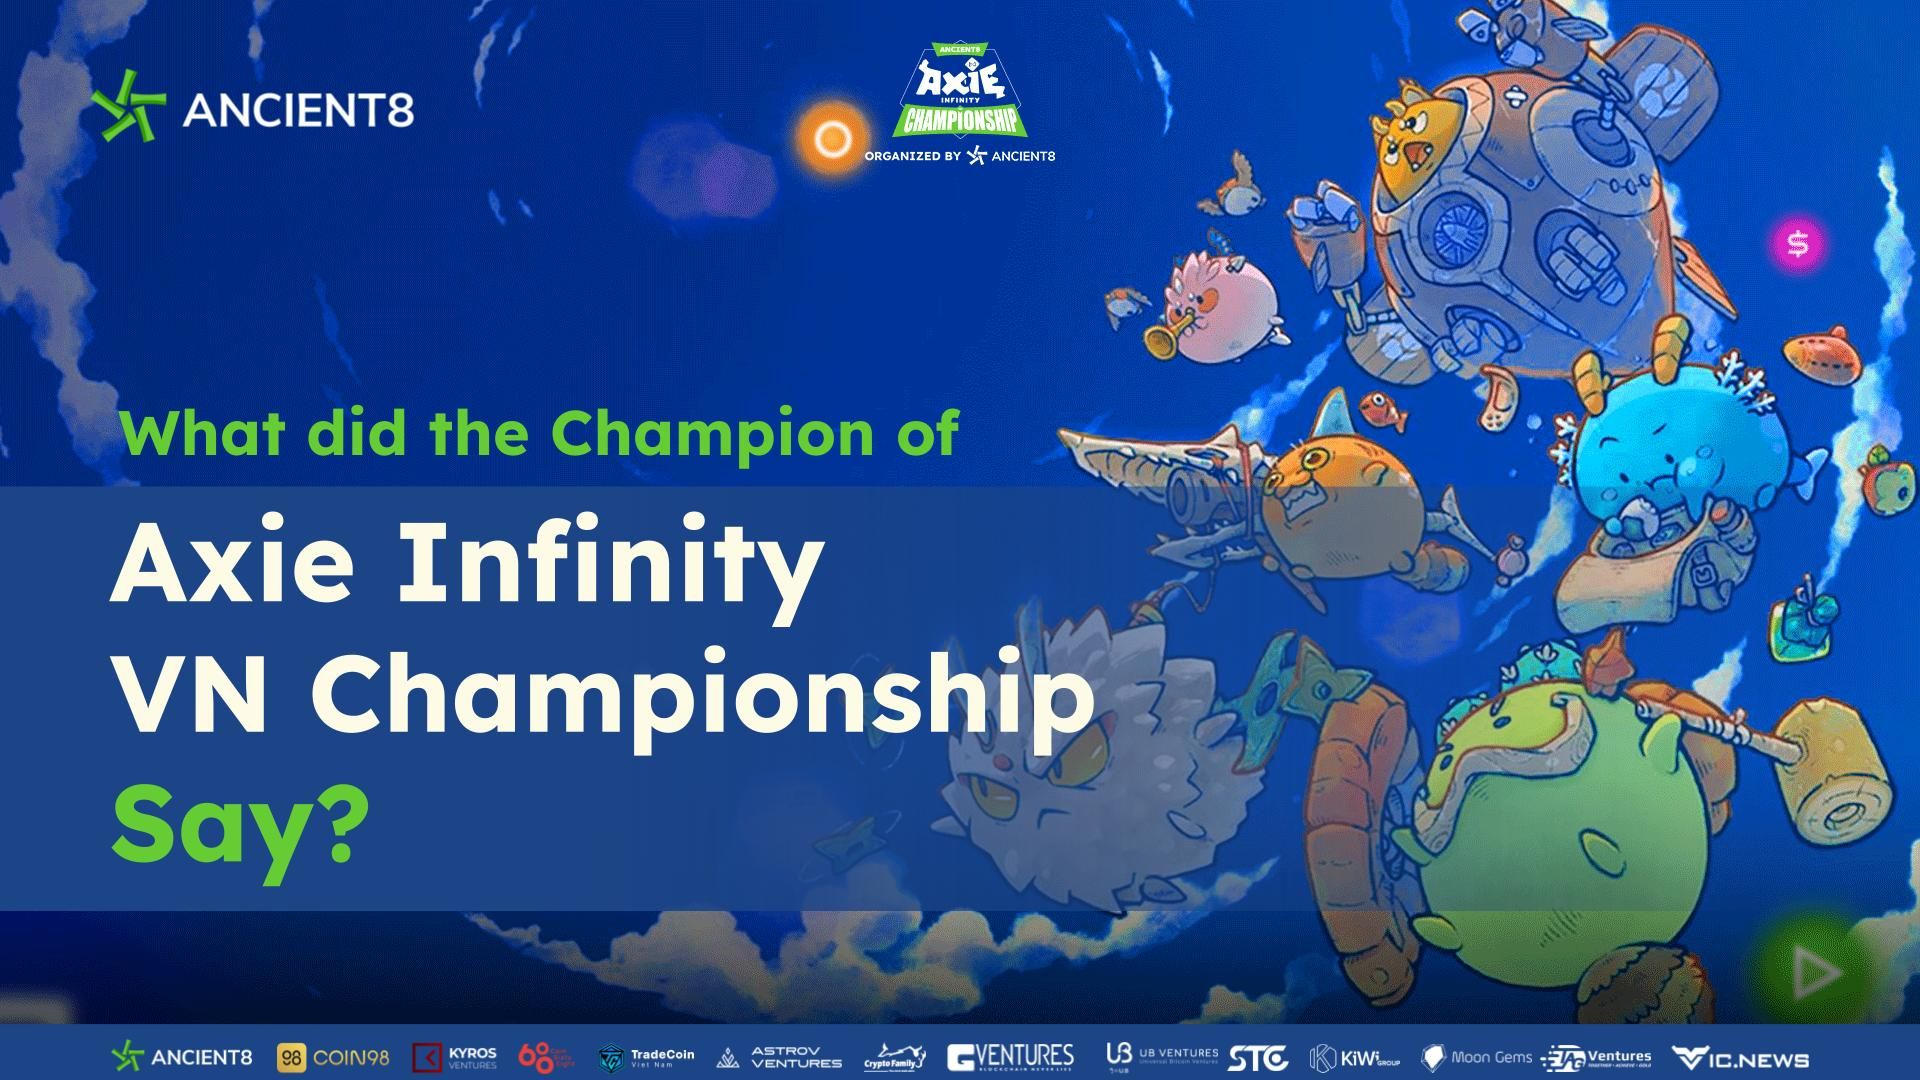 What did the Champion of Axie Infinity VN Championship say?